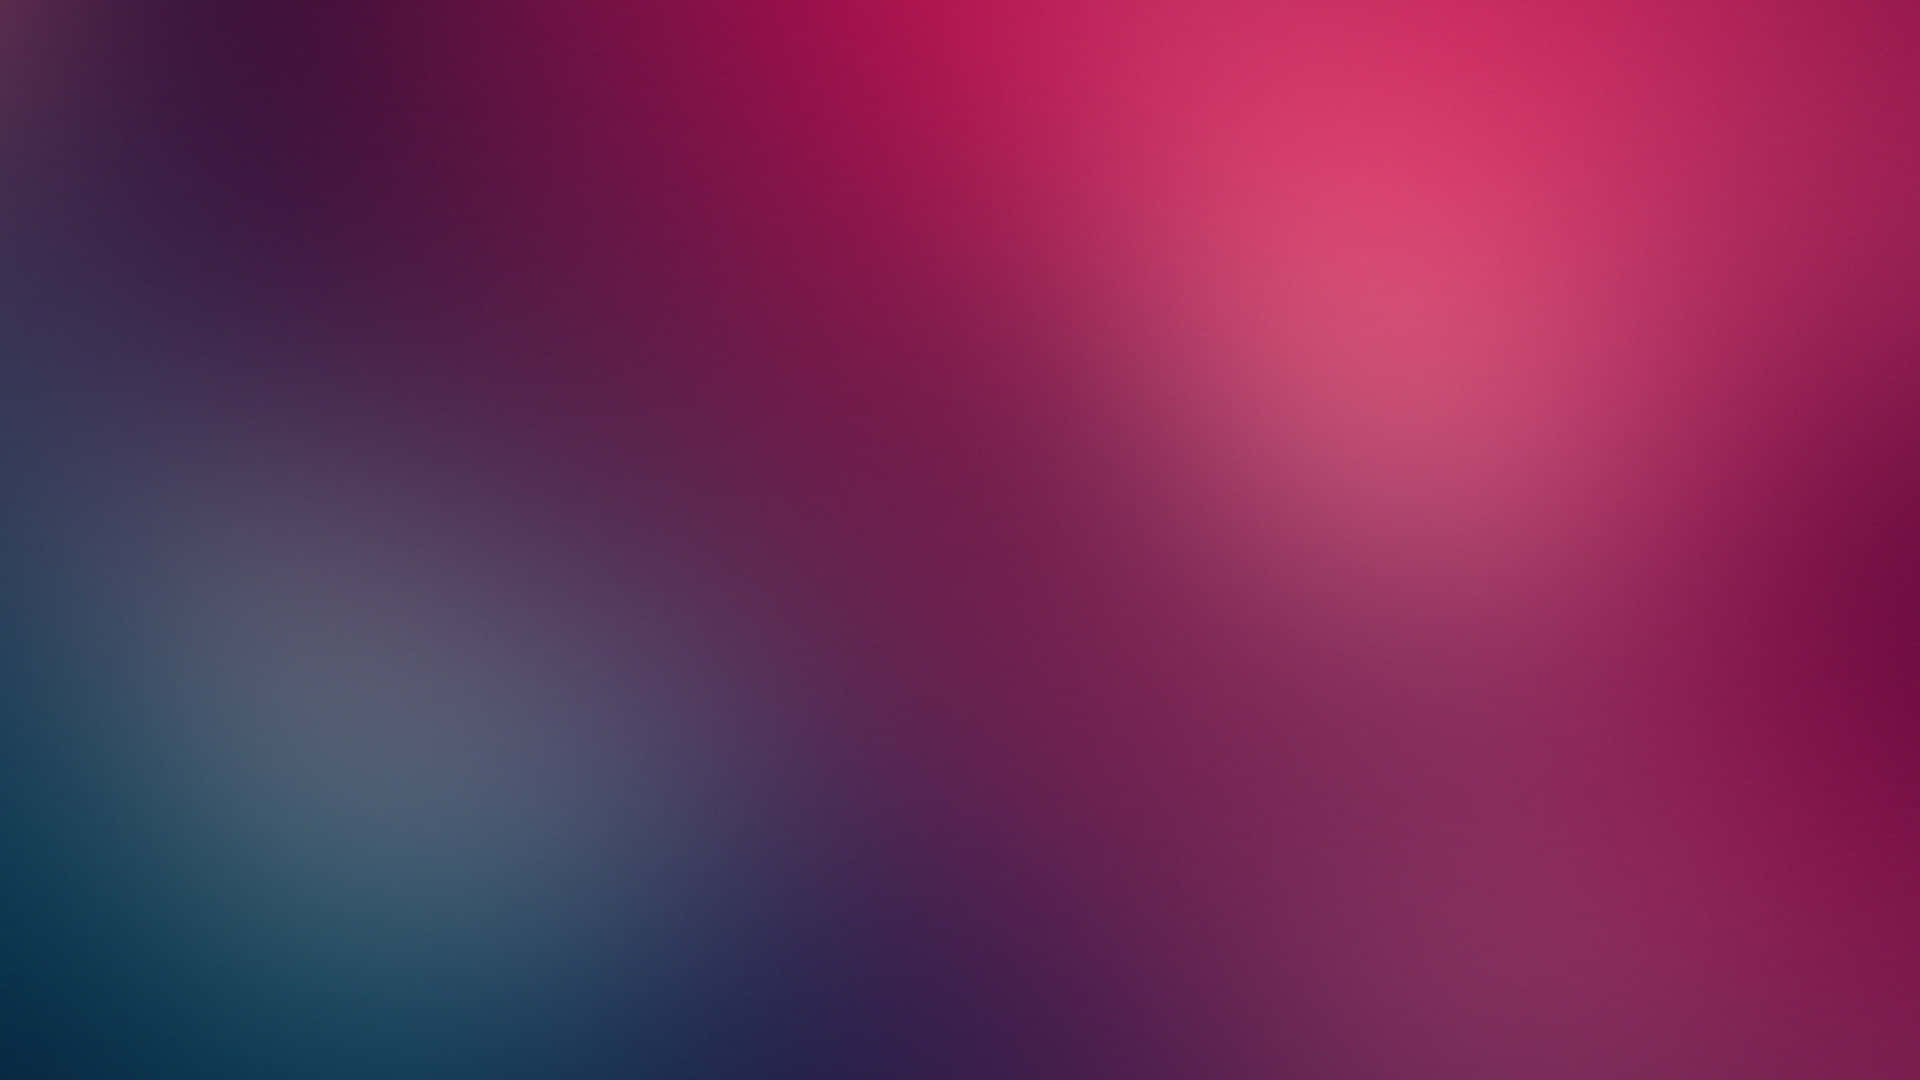 Vibrant Red Blue Gradient Background Wallpaper